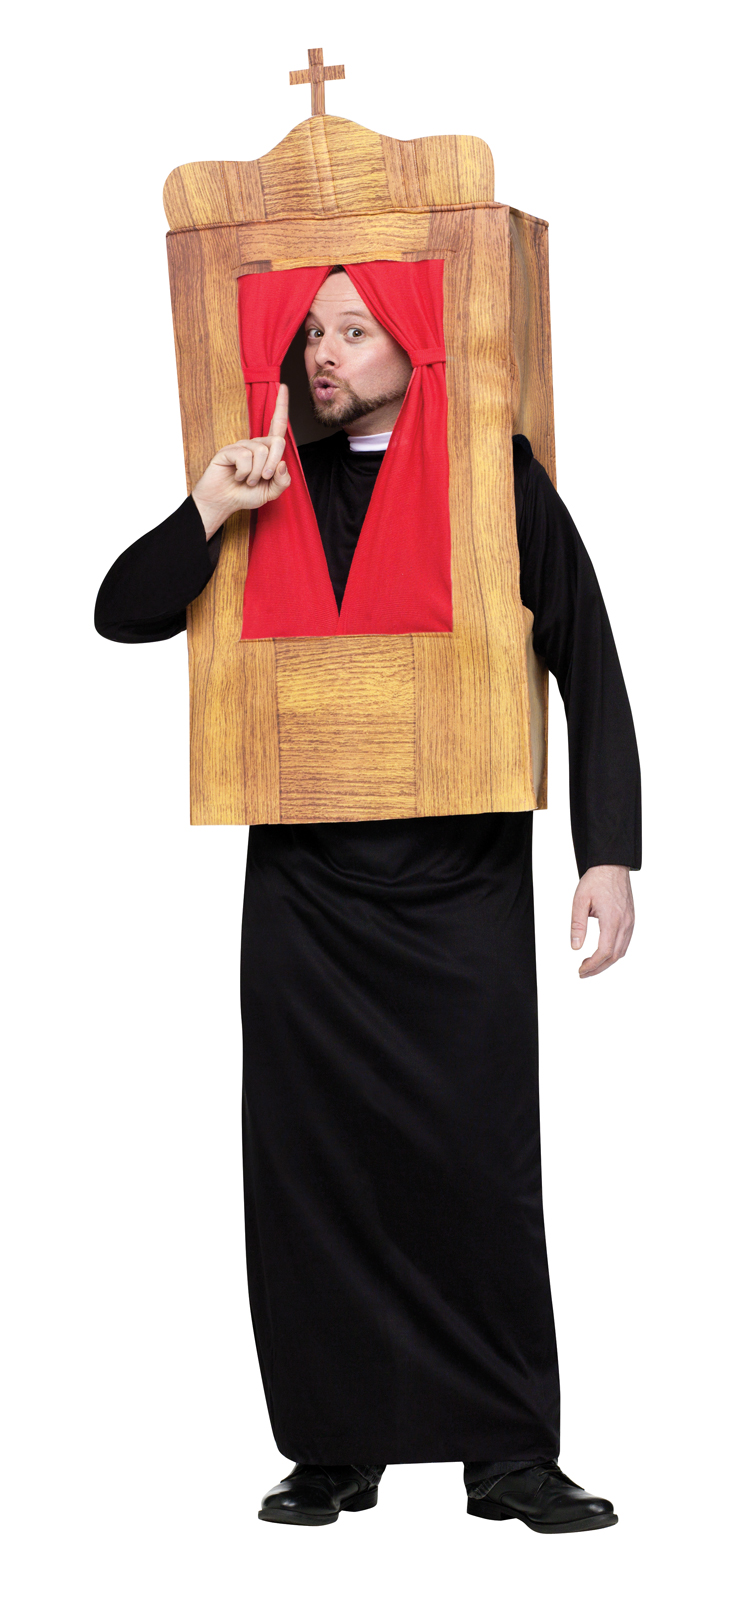 Fun World Men's The Confessional Adult Costume - Black - One Size